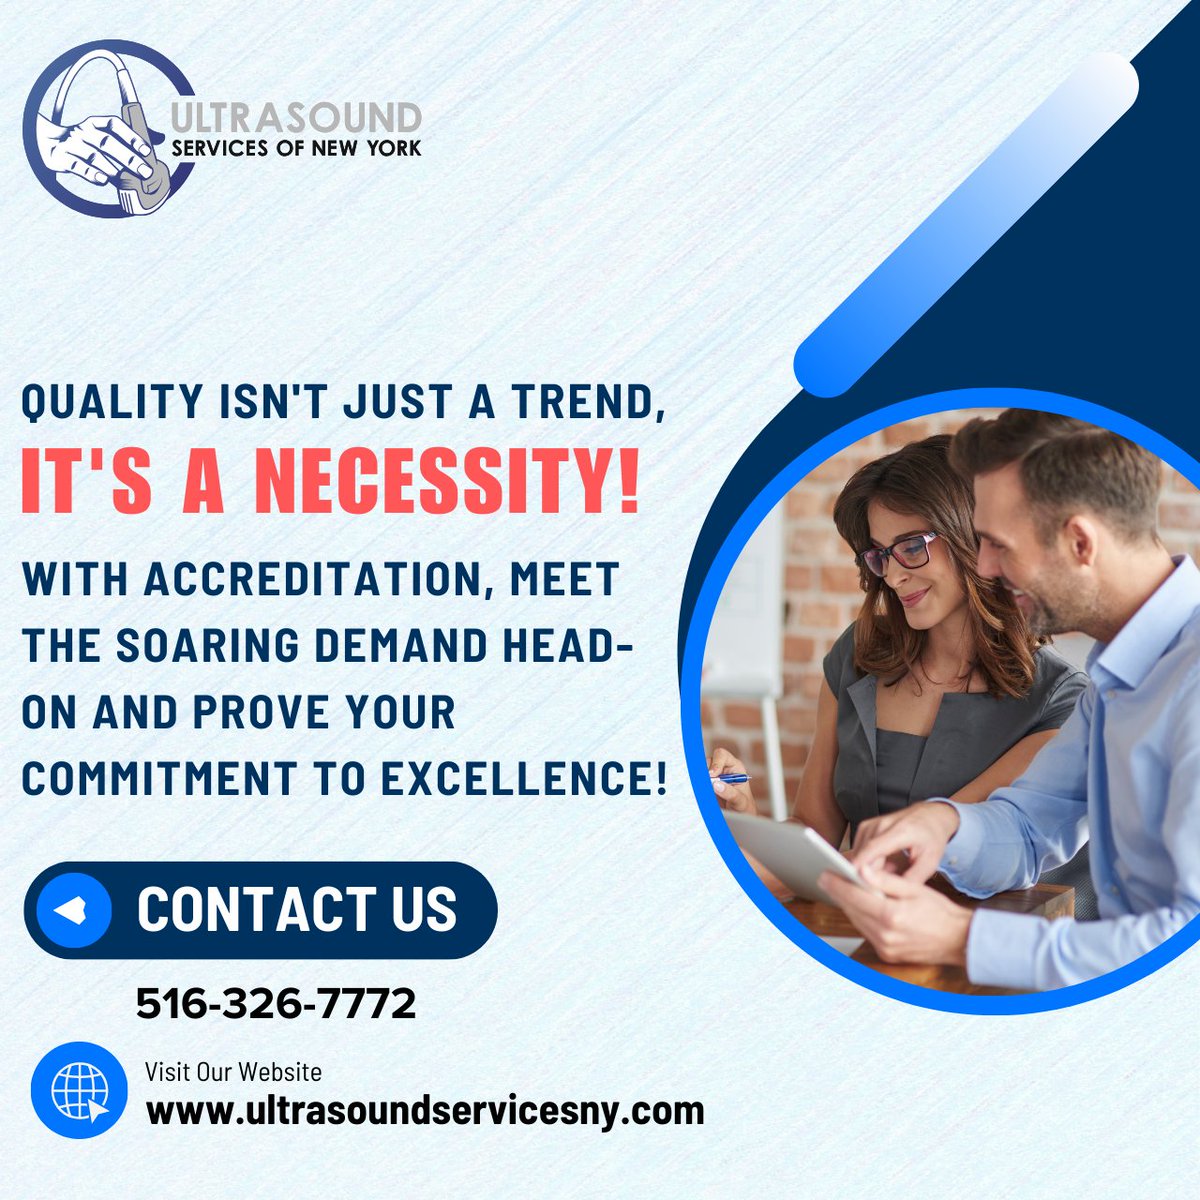 Quality isn't just a trend, it's essential! With accreditation, demonstrate your commitment to excellence and meet the rising demand with confidence. Call- +1 516-326-7772
#Accreditation #QualityMatters #AccreditationSuccess #HealthcareCareers #Healthcare #Satffing #USNY #NewYork